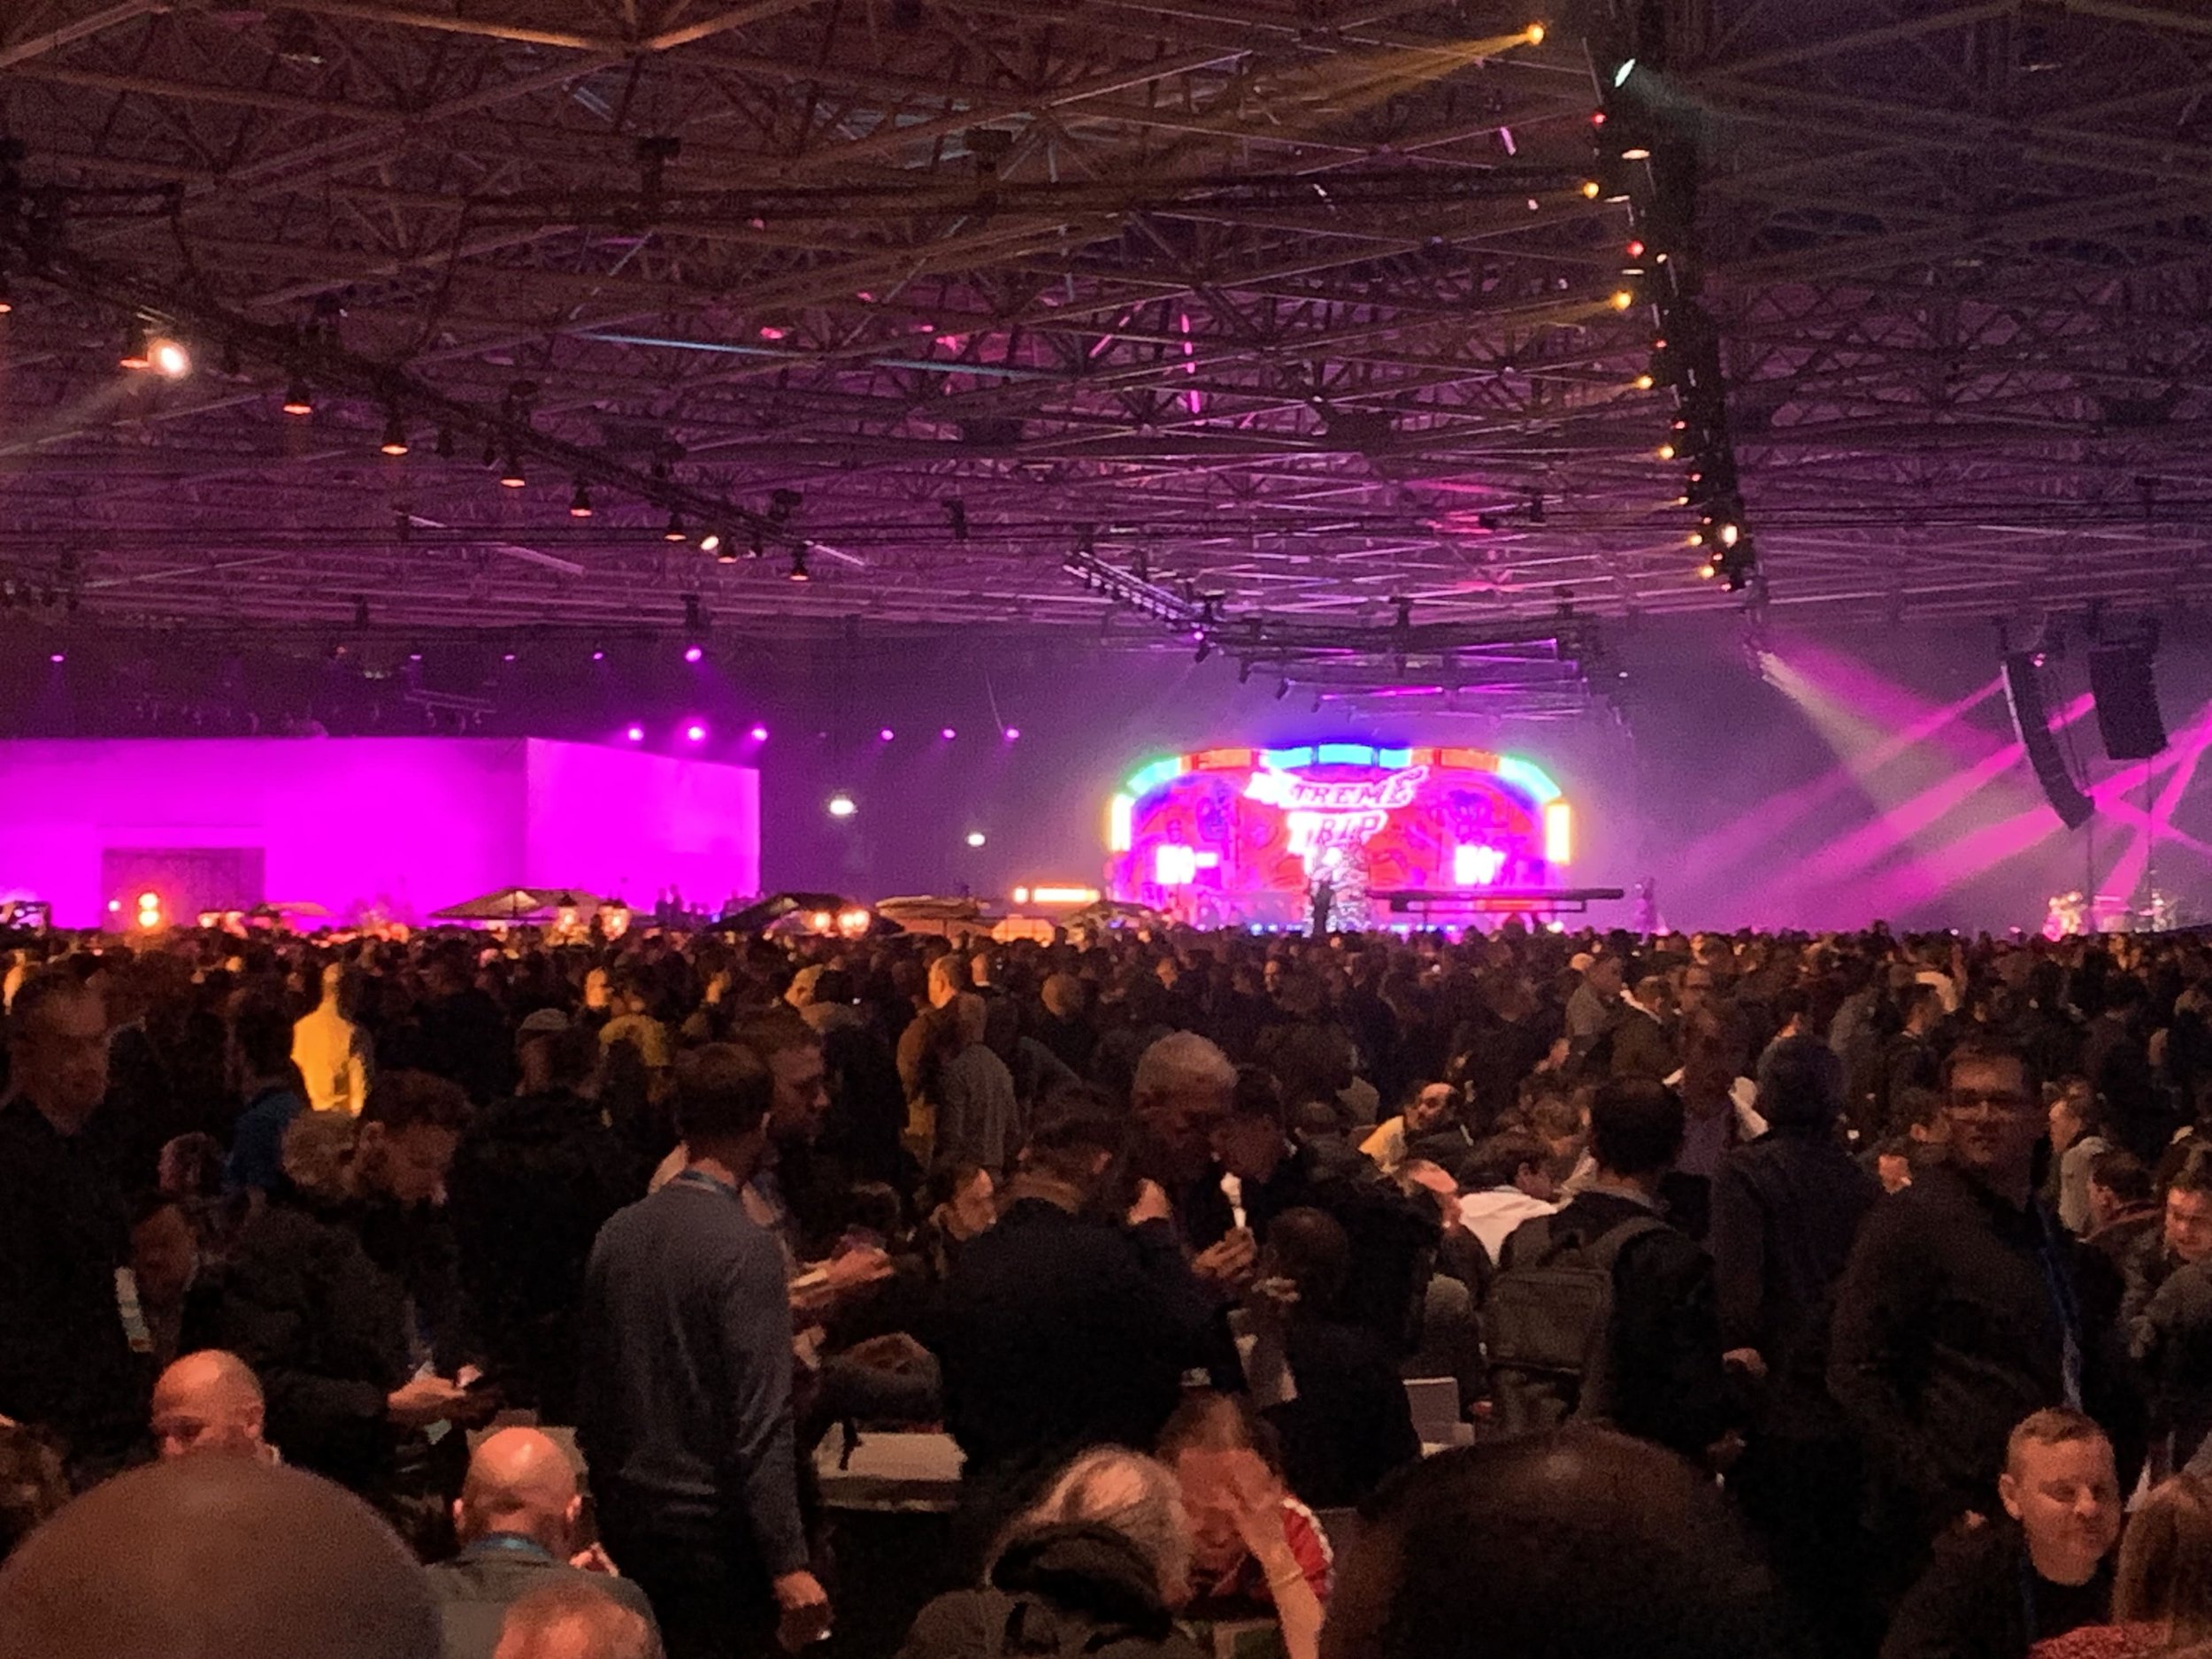 Absolute chaos when everyone moved to the party after the guest keynote